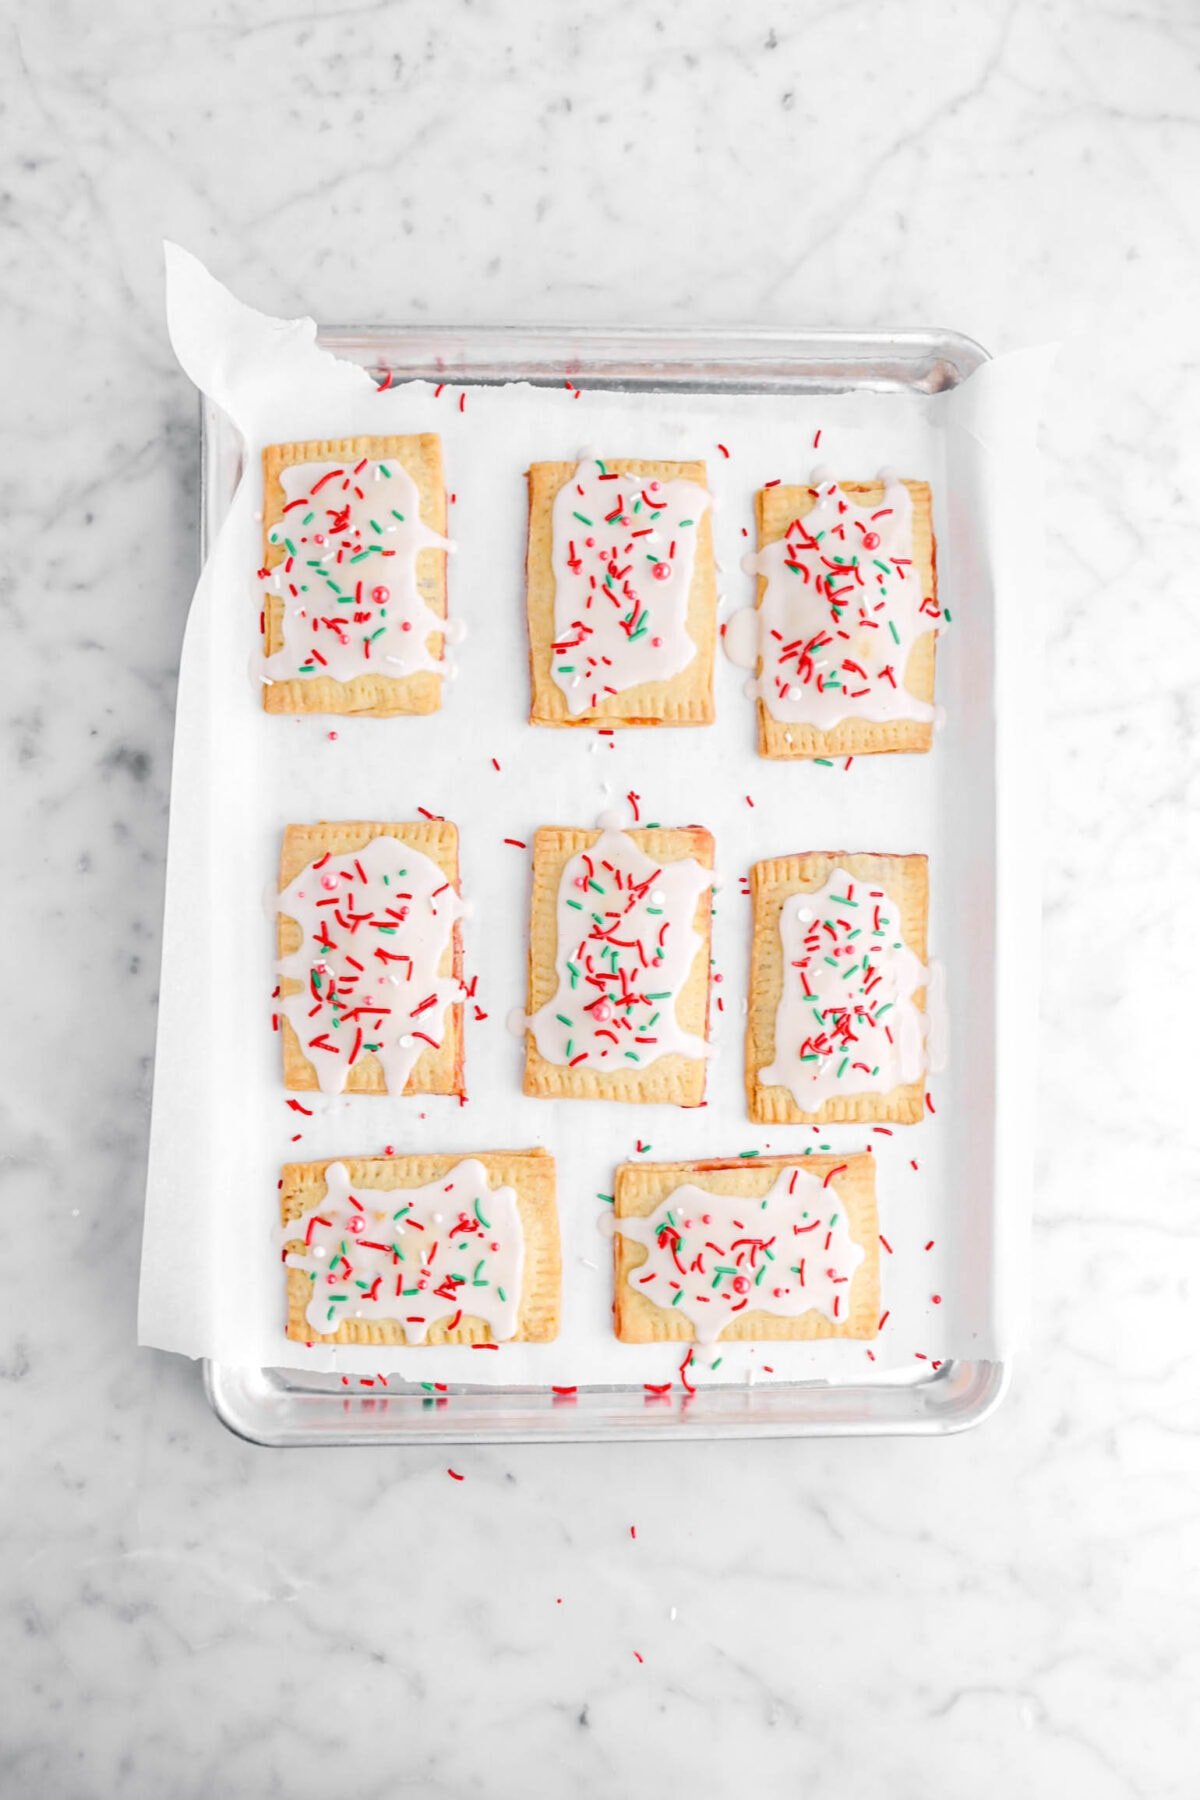 iced pop tarts with sprinkles on top on lined sheet pan.